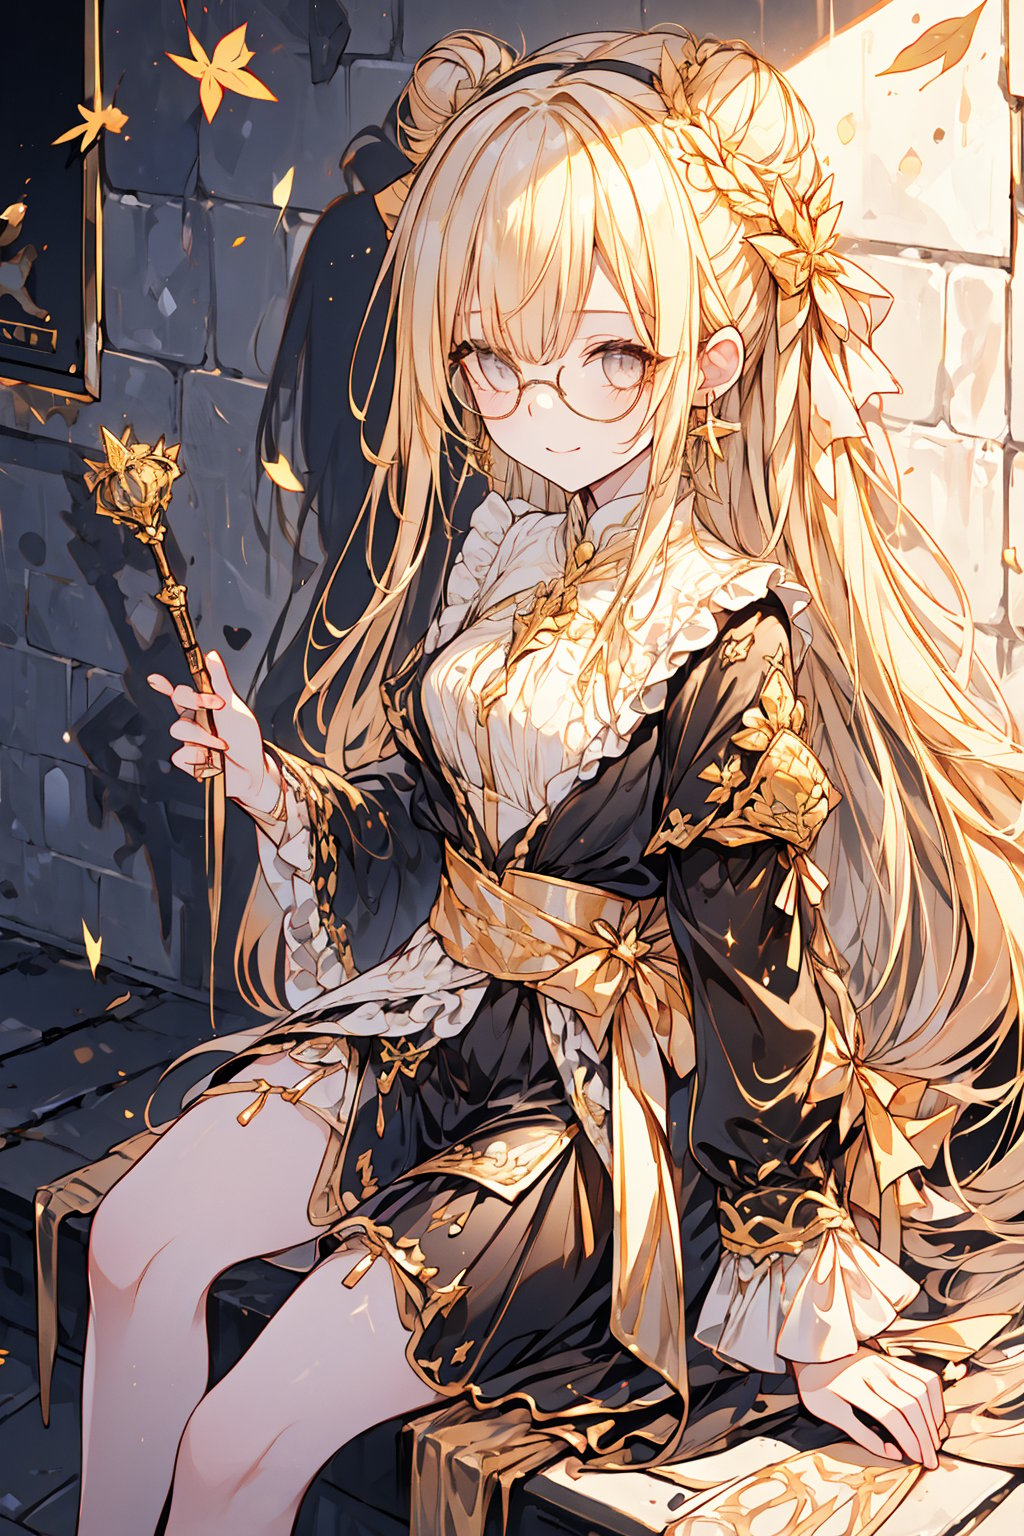 (1girl, long hair, blonde and brown  hair, straight hair, all hair tied up into a bun, grey eyes, detailed eyes, cross earrings, earrings, gold earrings, 4k, holding maple leaf, sitting beside wall, leaning on wall, glasses), fullbody, masterpiece, best quality, Beautifully Aesthetic, casual outfit, black outfit, she sits quietly yet gracefully, street, alley, dark alley, dark lighting, smiling expression, ,1 girl, 